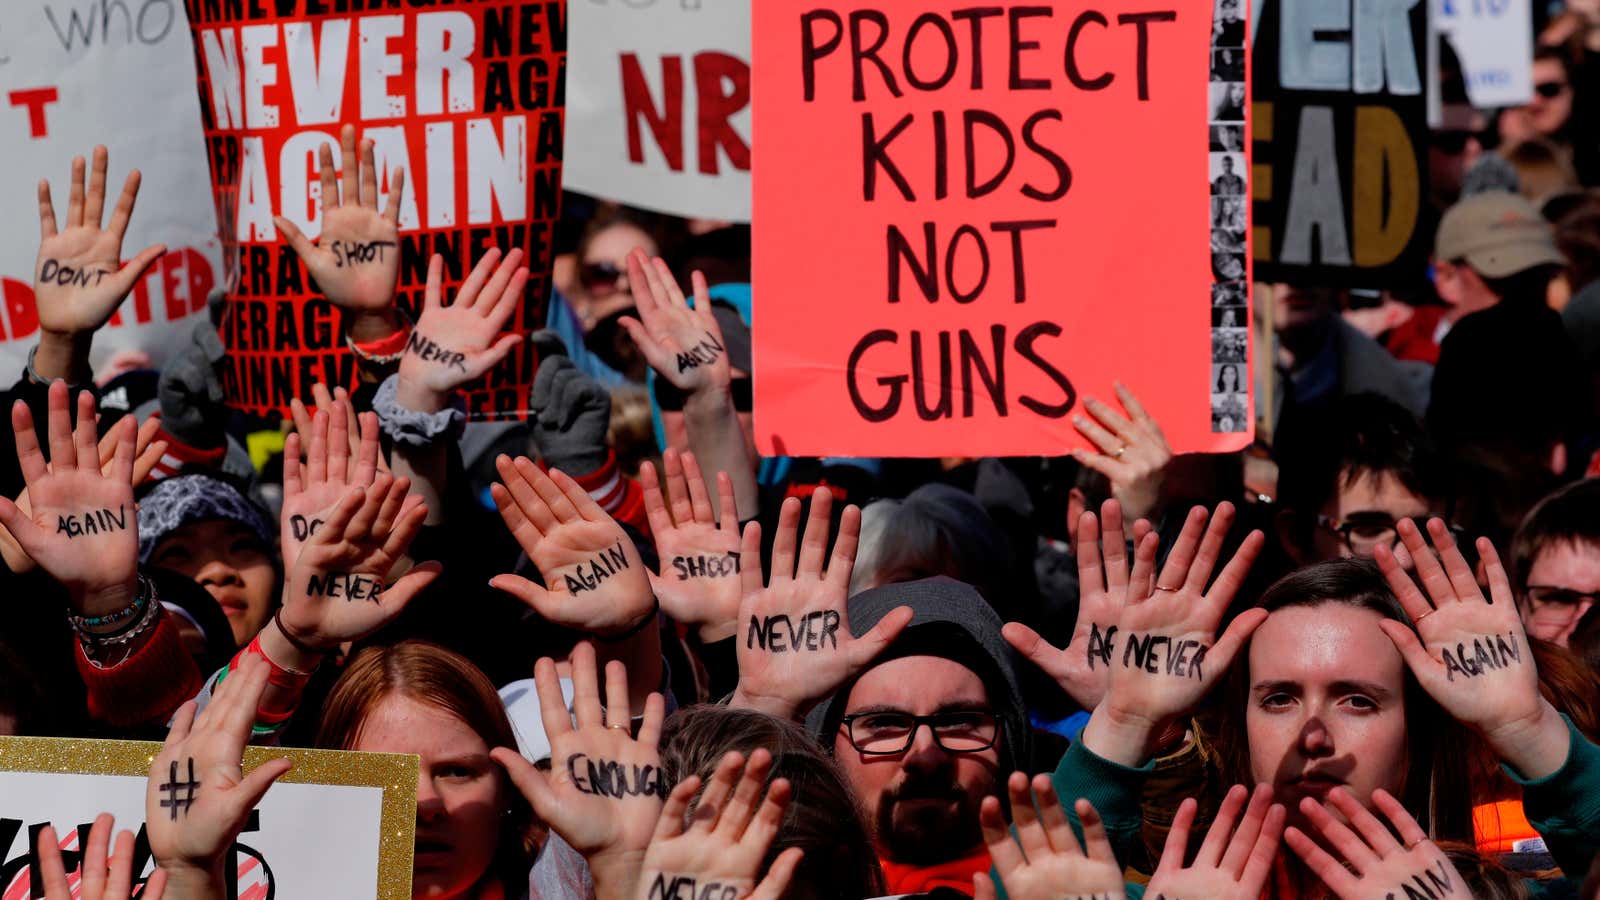 “March for Our Lives” event demanding gun control  in March 2018.